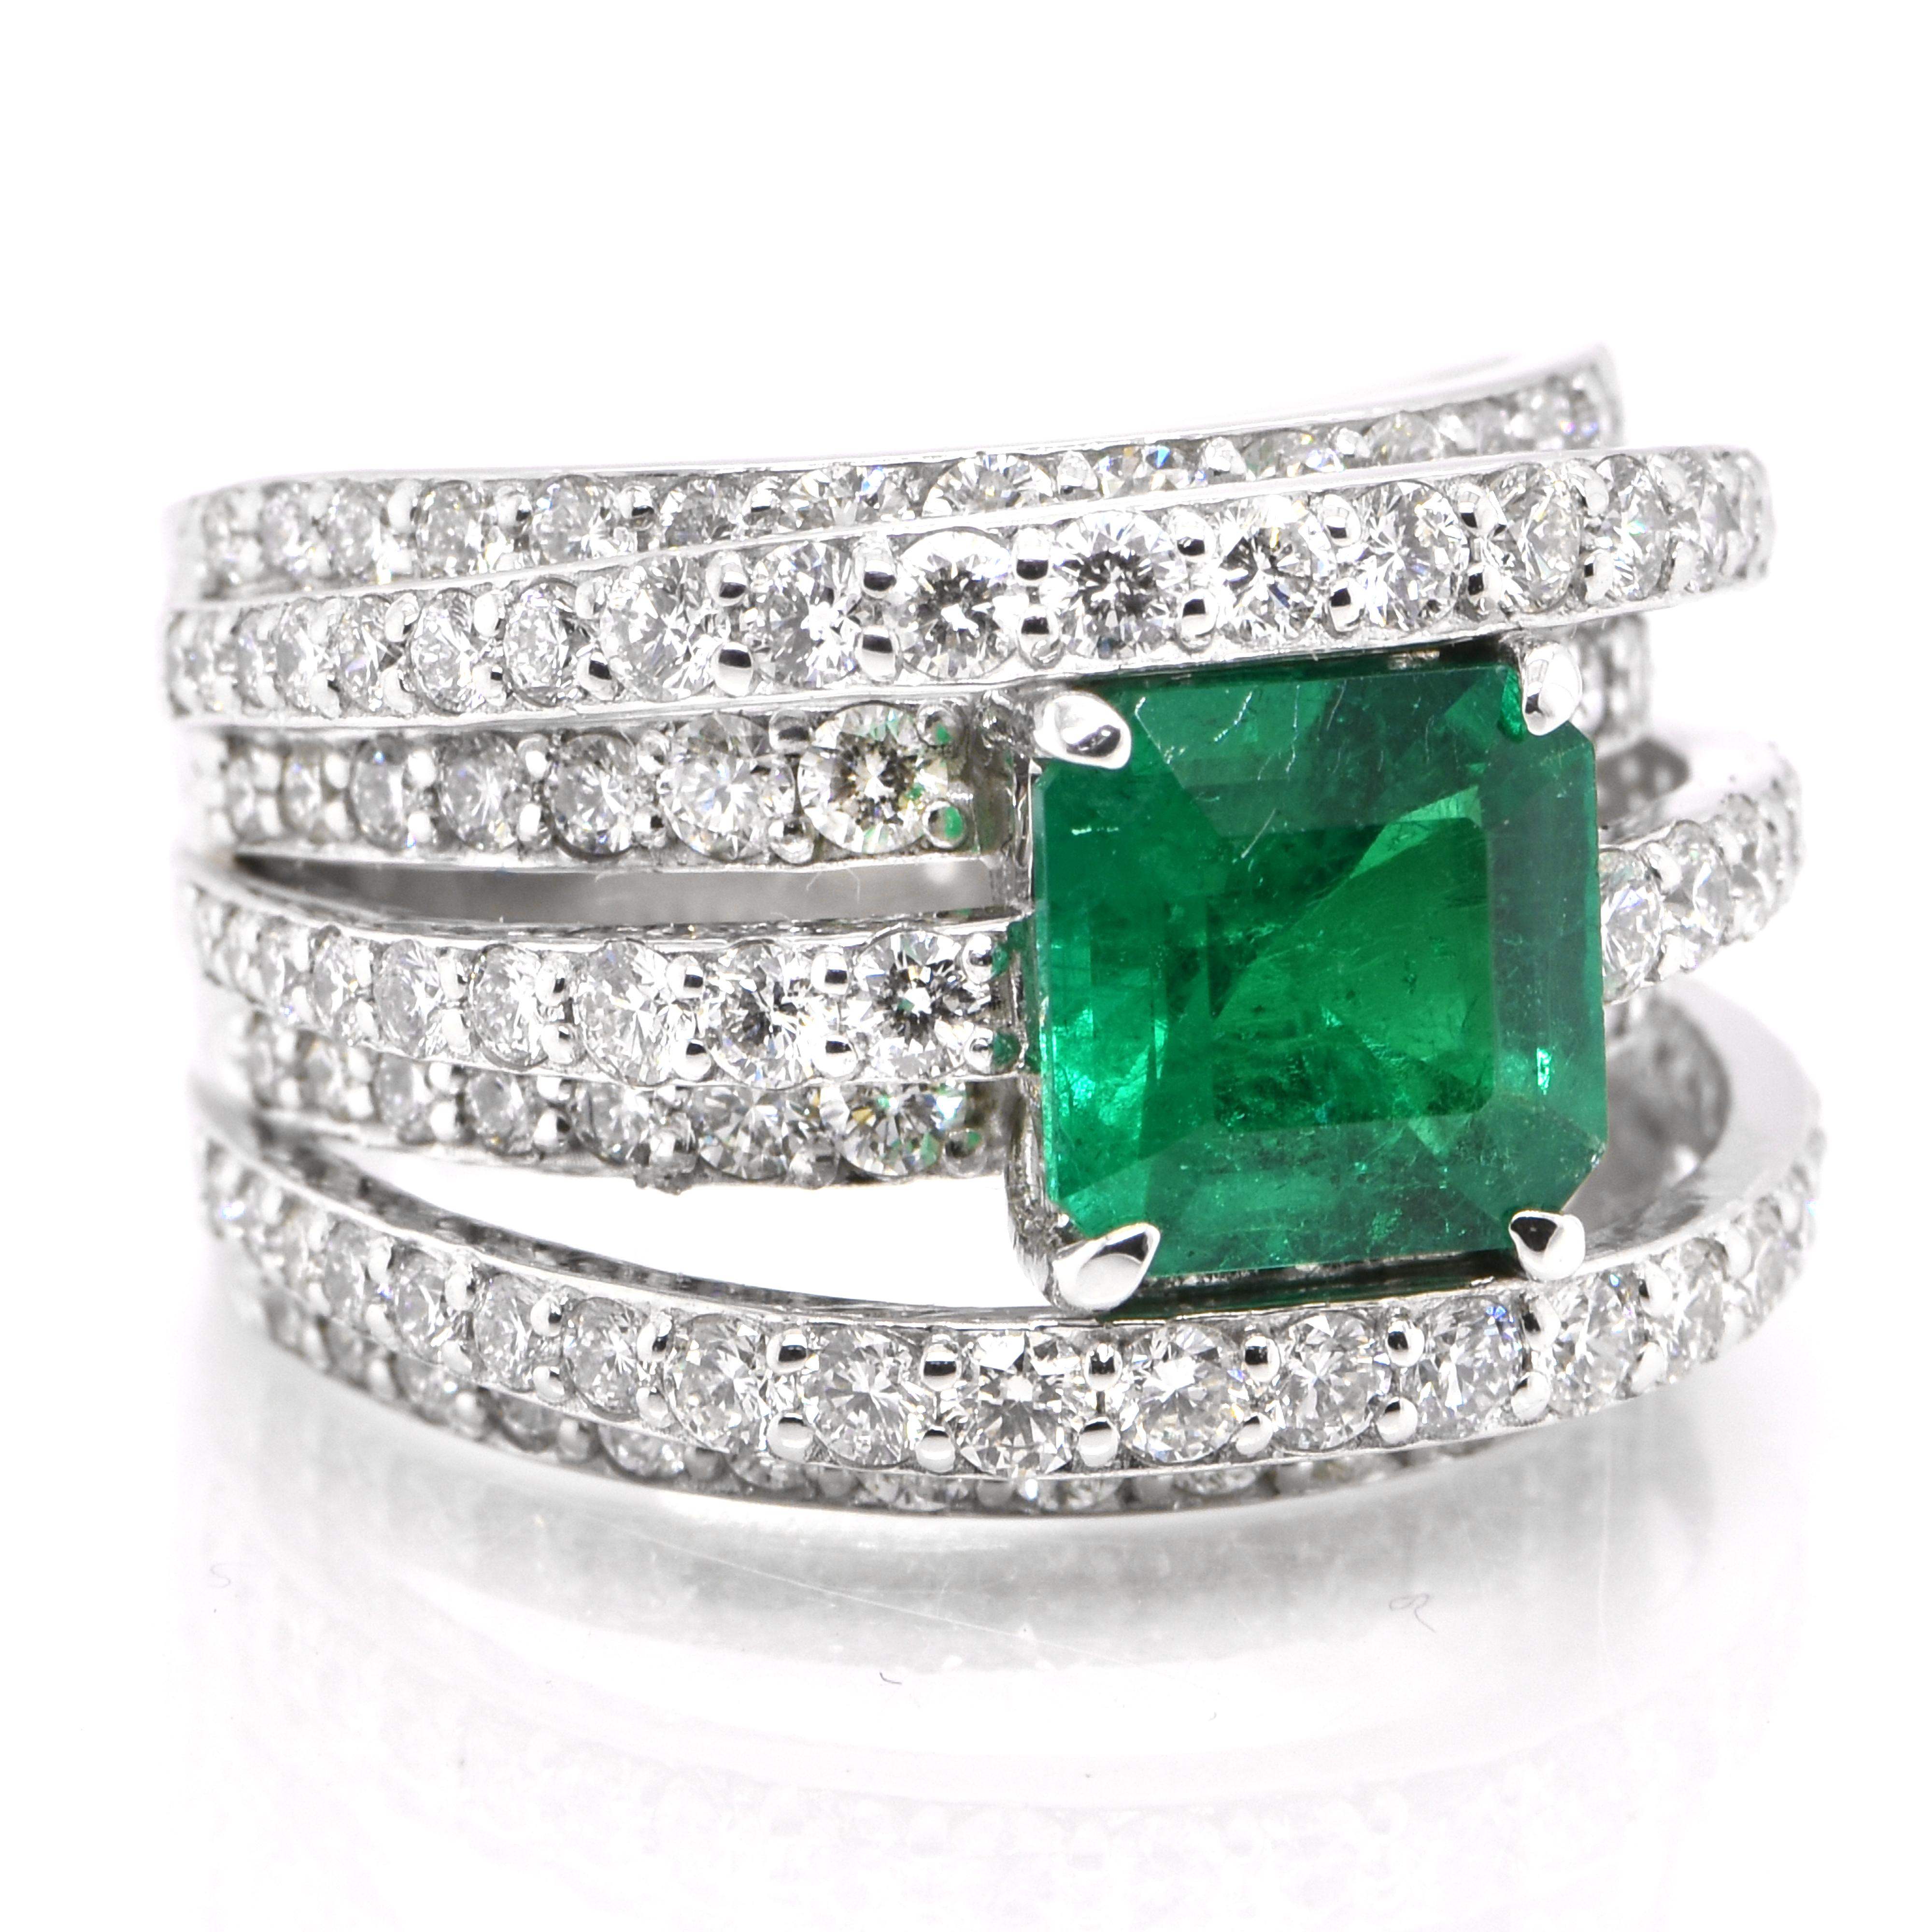 Modern 1.66 Carat Colombian, Muzo Color Emerald & Diamond Cocktail Ring Set in Platinum For Sale